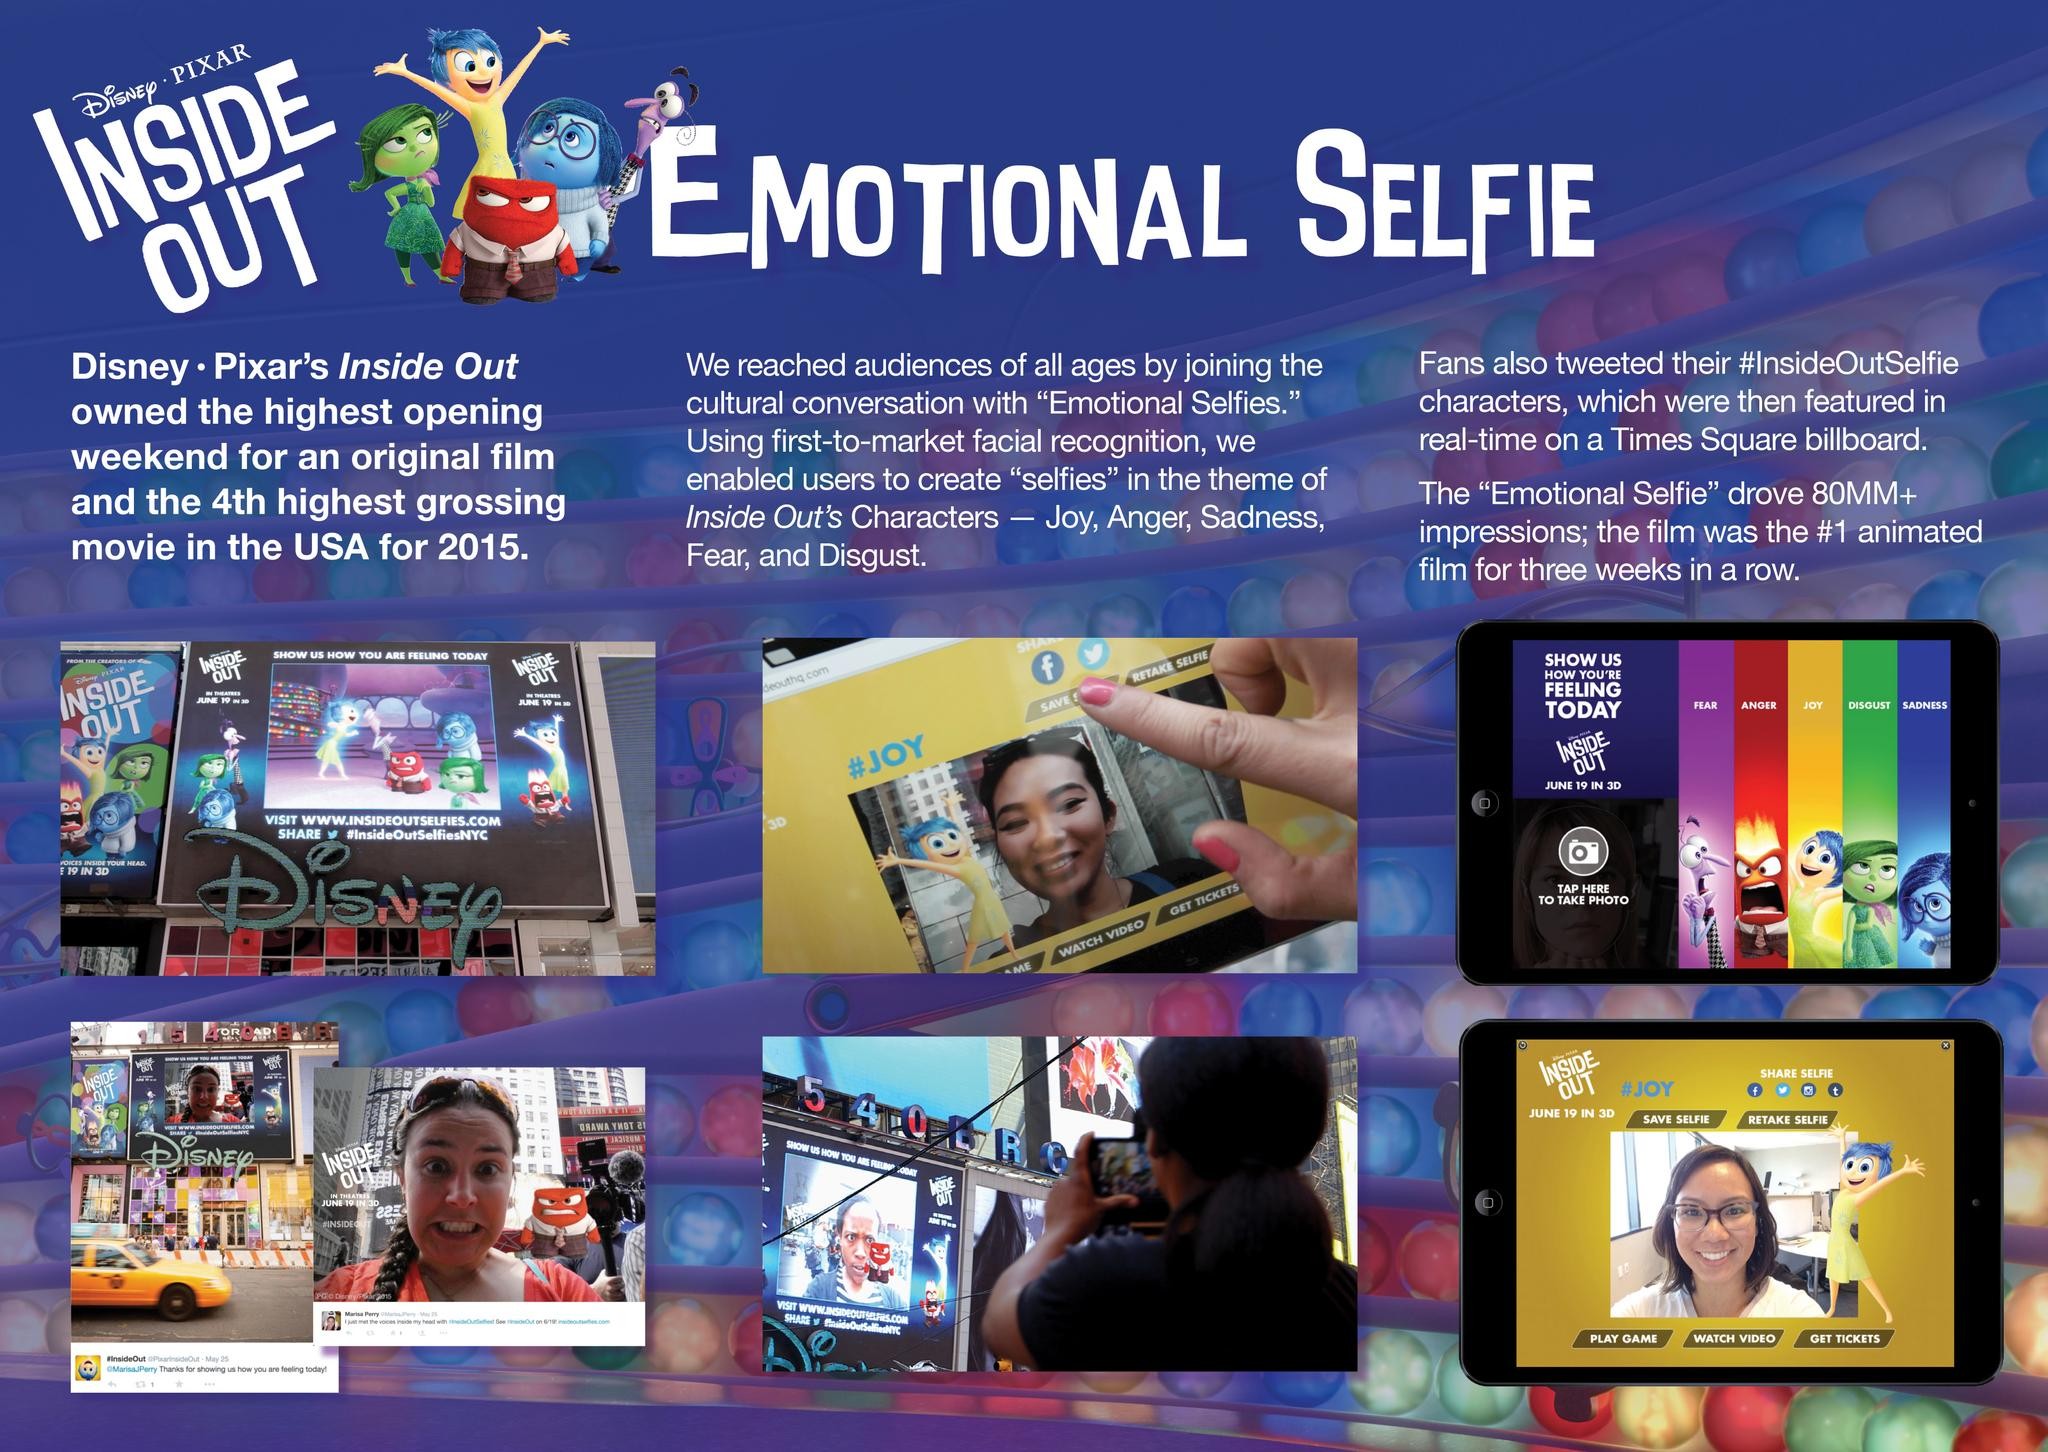 Inside Out "Emotional Selfie" Experience